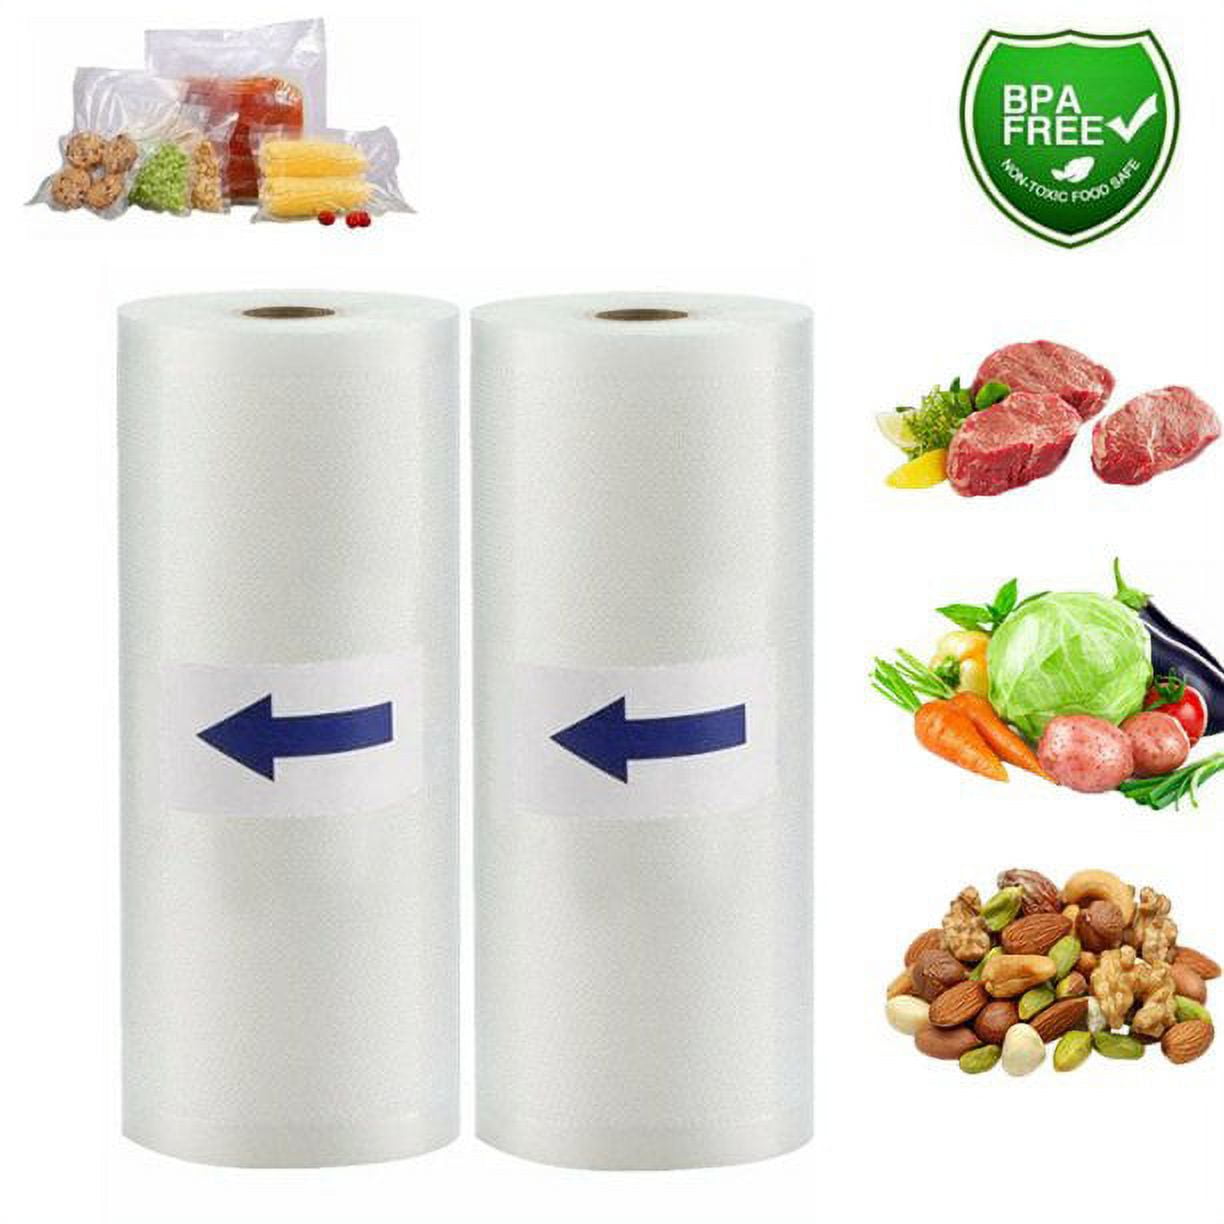 Fstcrt Vacuum Sealer Bags with BPA Free,Heavy Duty,Freezer Bags Vacuum  Storage Bags for Food Great for vac Storage, Meal Prep or Sous  Vide,Universal